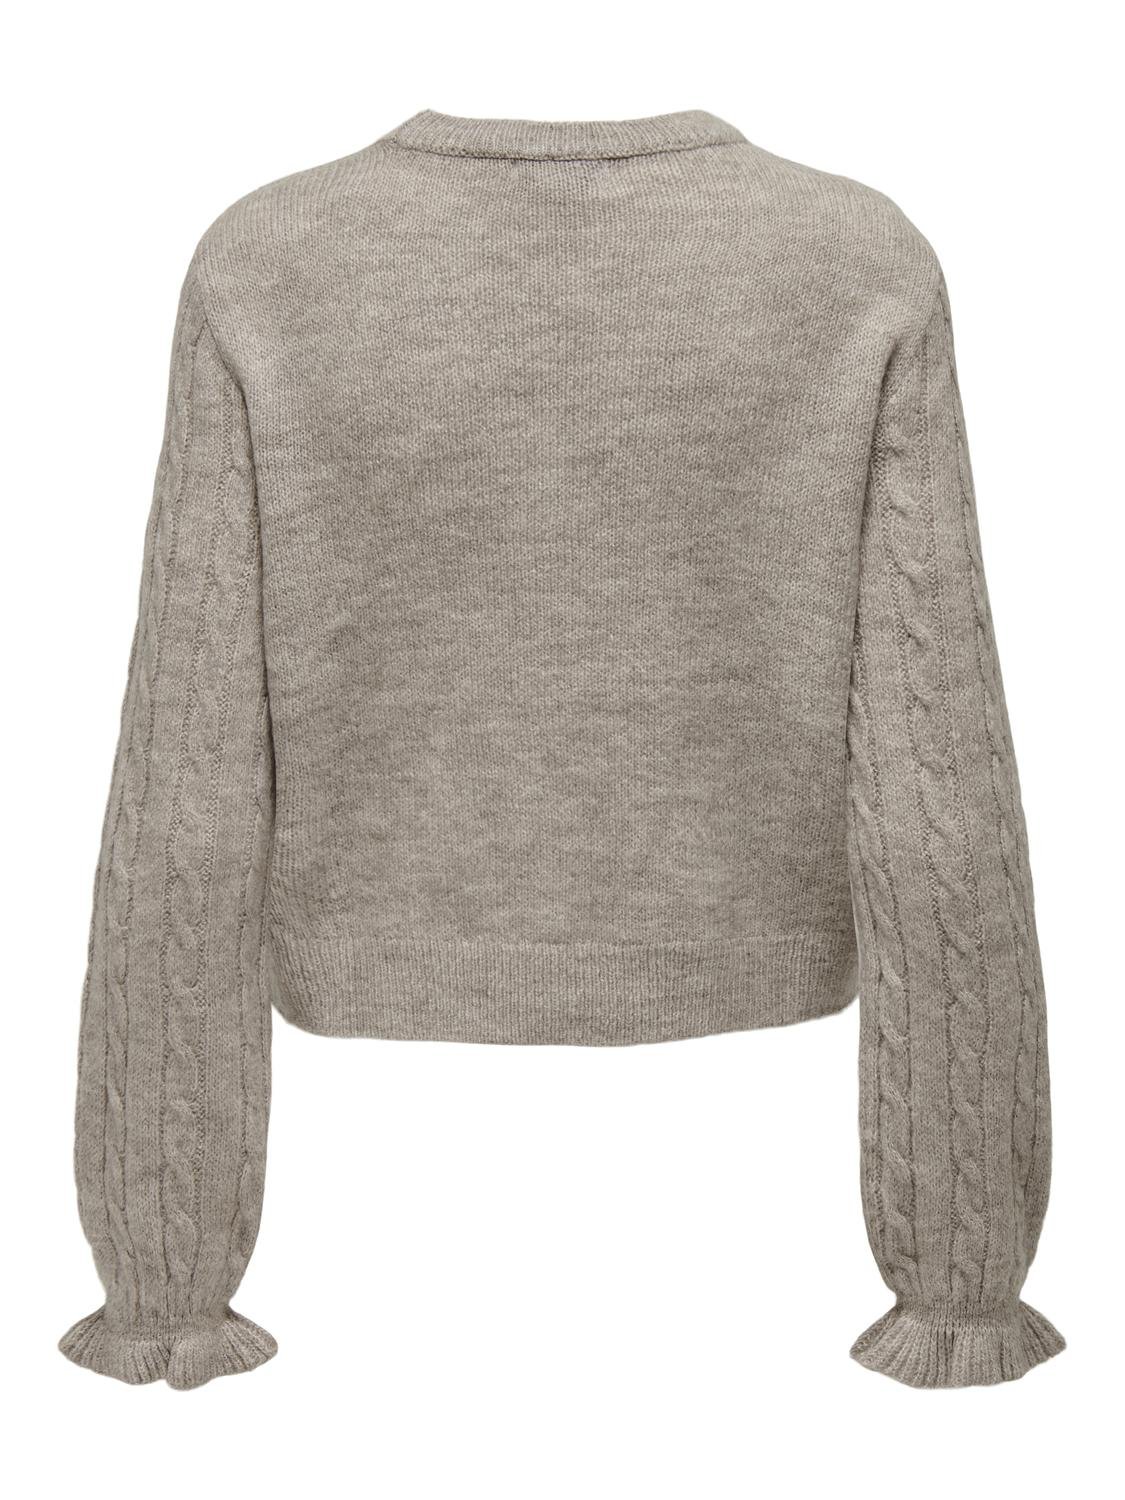 ONLY O-ringning Pullover -Pumice Stone - 15310080